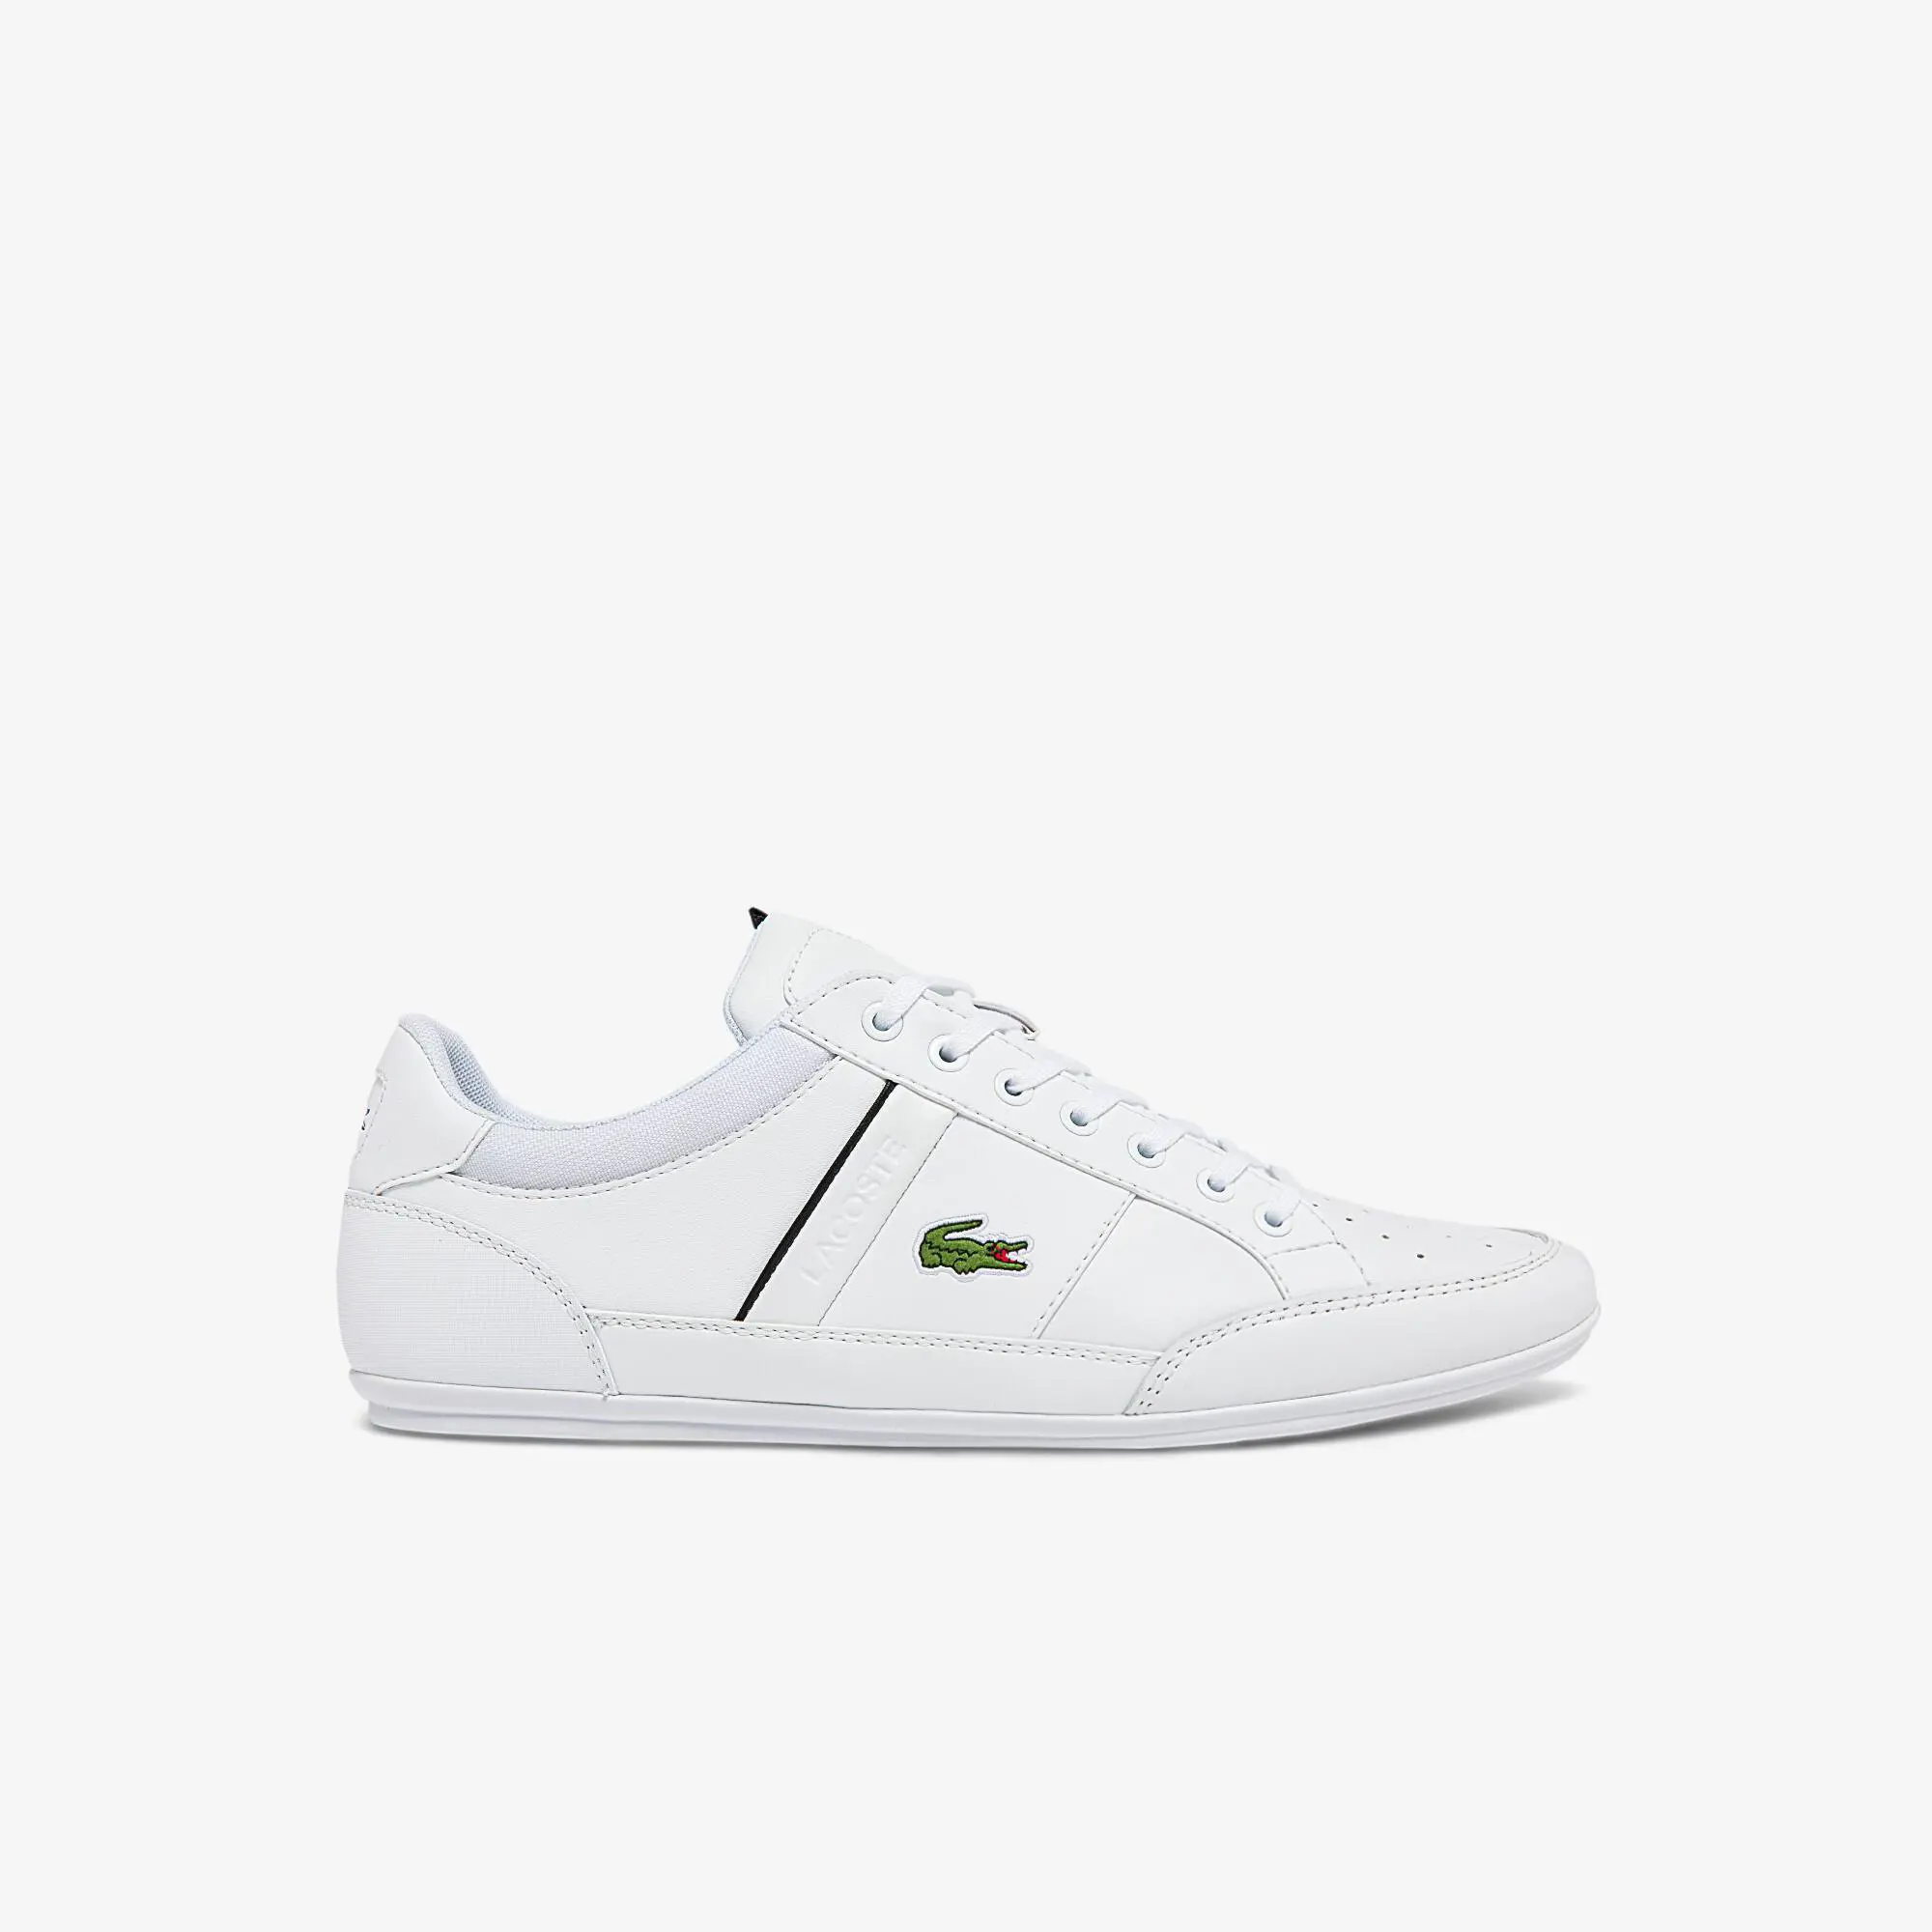 Lacoste Men's Chaymon Synthetic and Leather Sneakers. 1